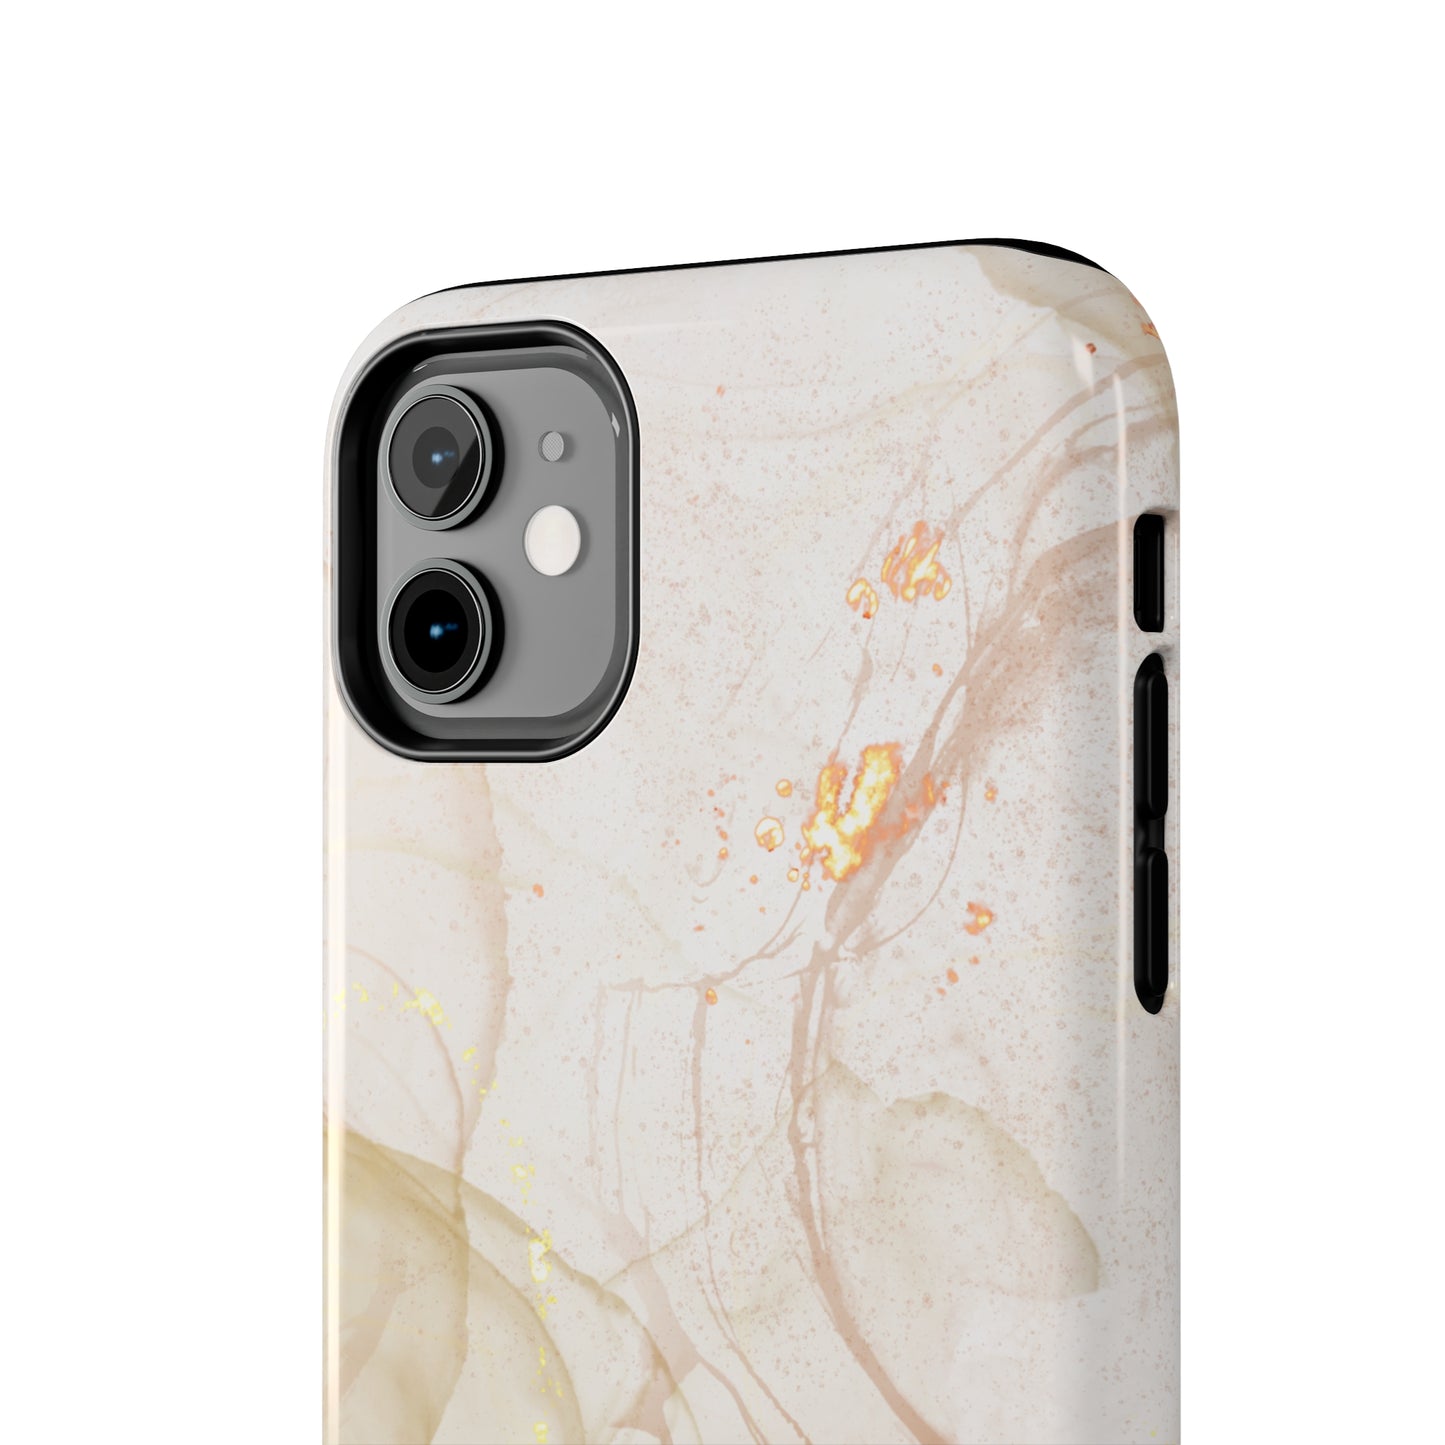 Ethereal Elegance - iPhone Case